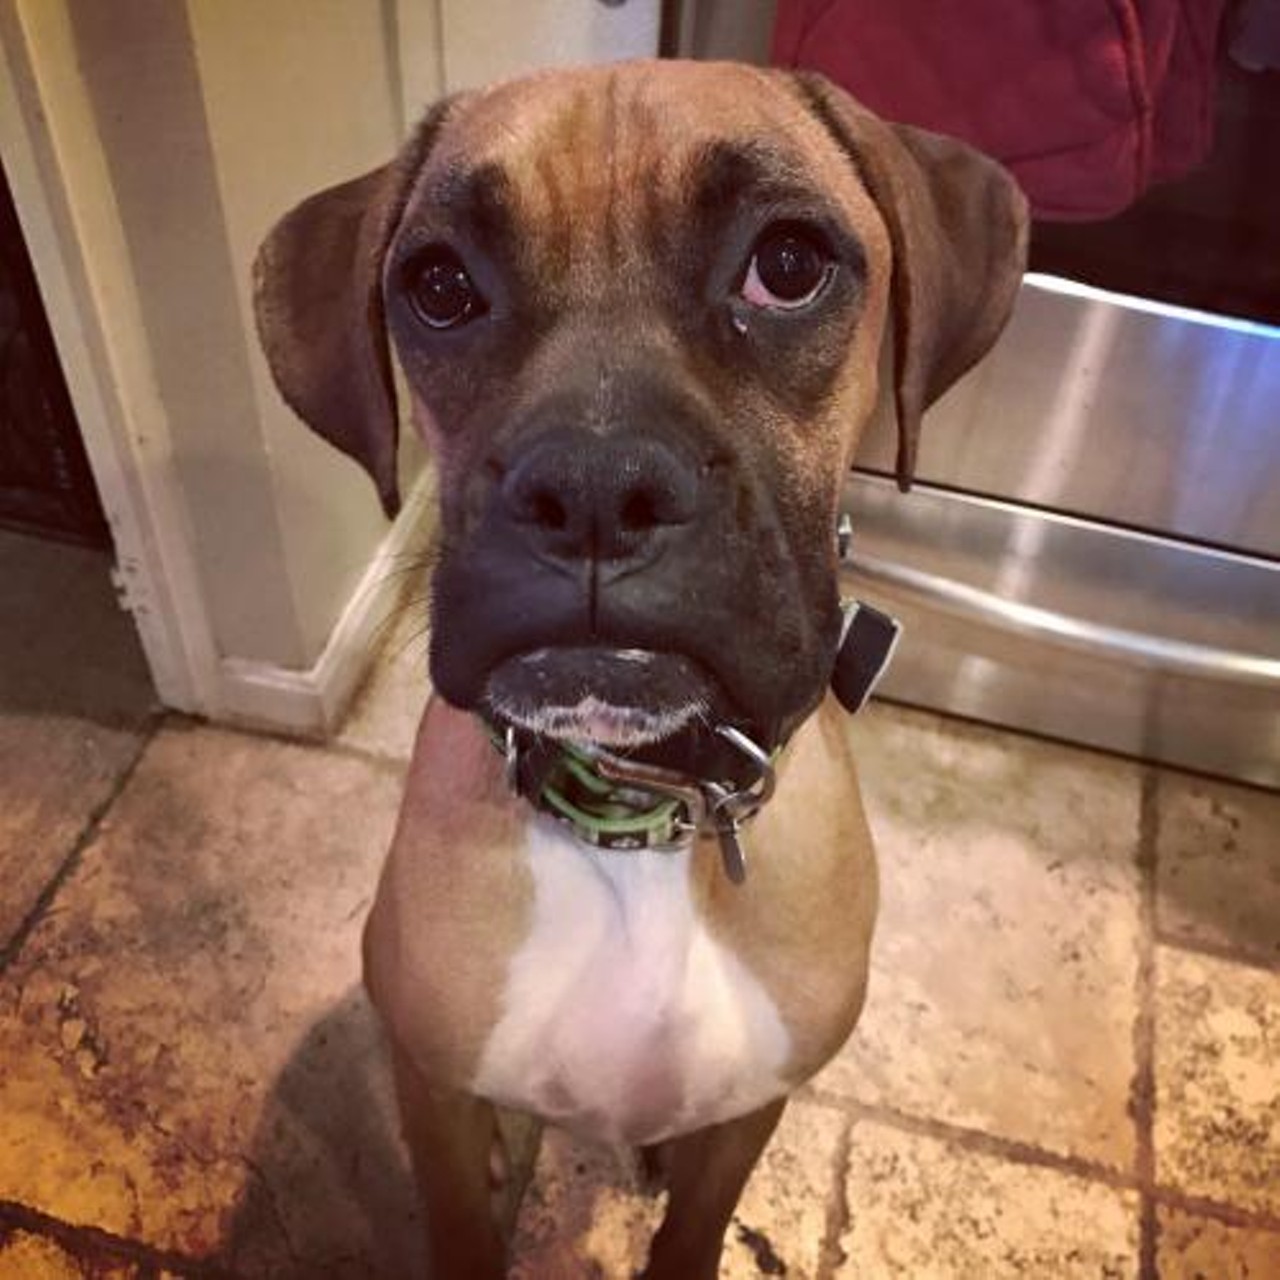  Frankie
1-year-old, Boxer Mix